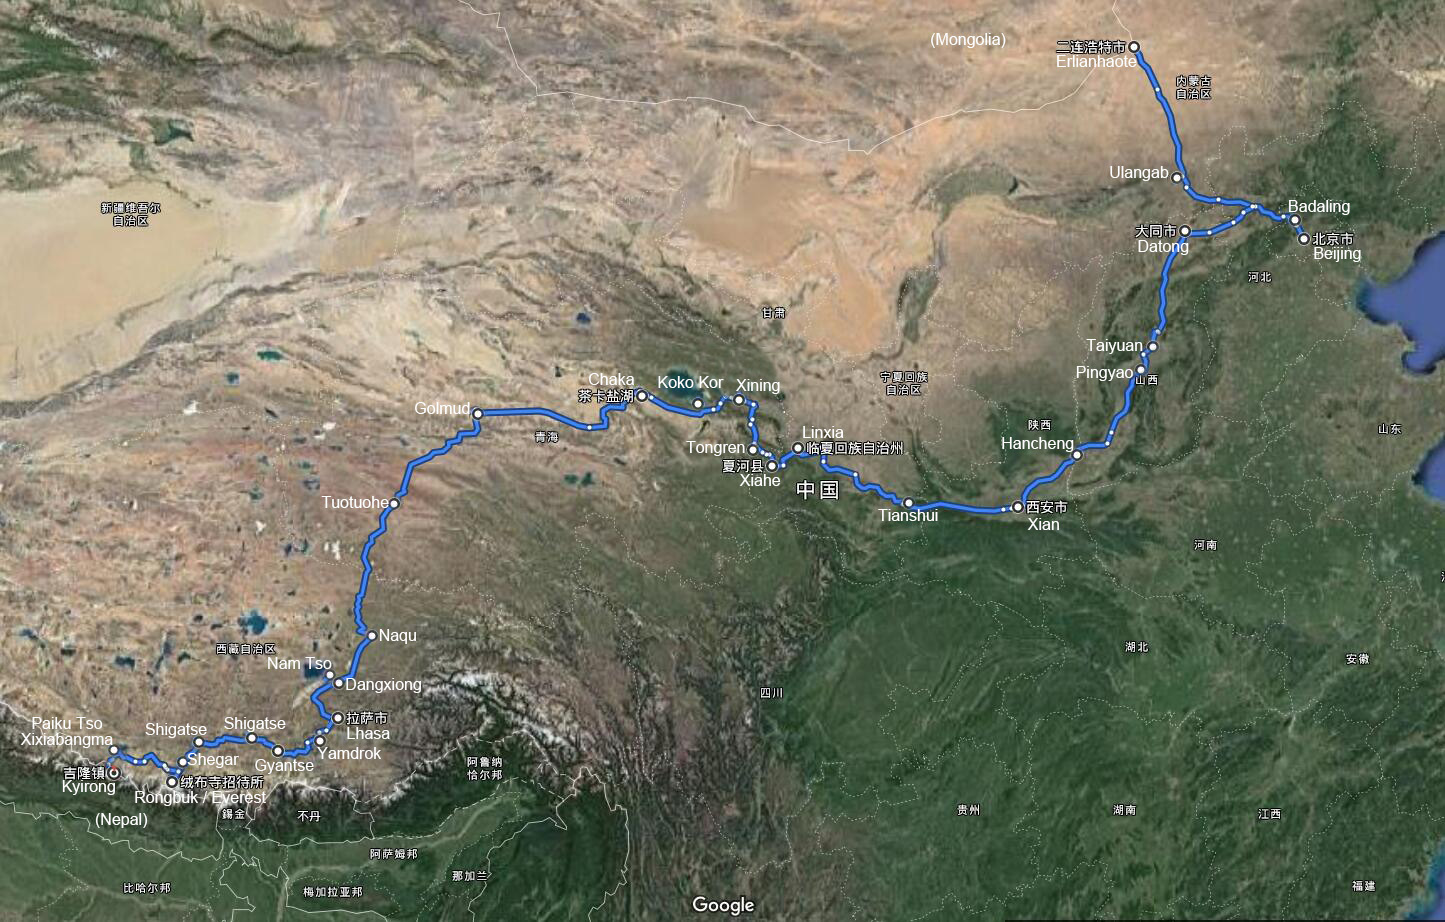 Self Drive Tour from Nepal through China to Mongolia